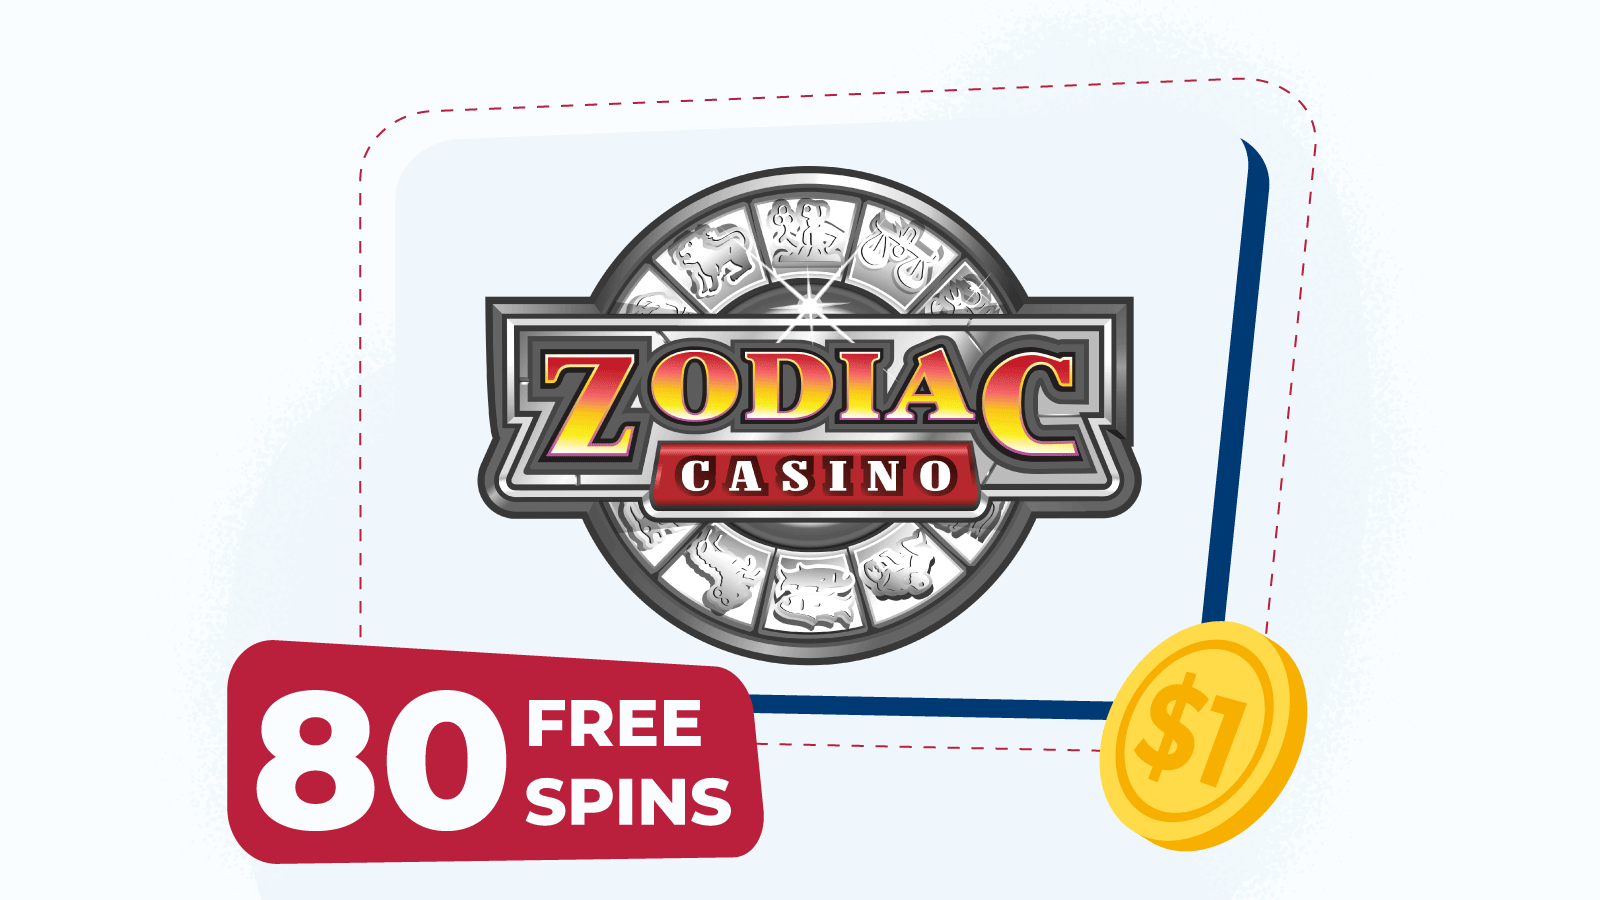 80 free spins for ¥1 at Zodiac Casino Rewards